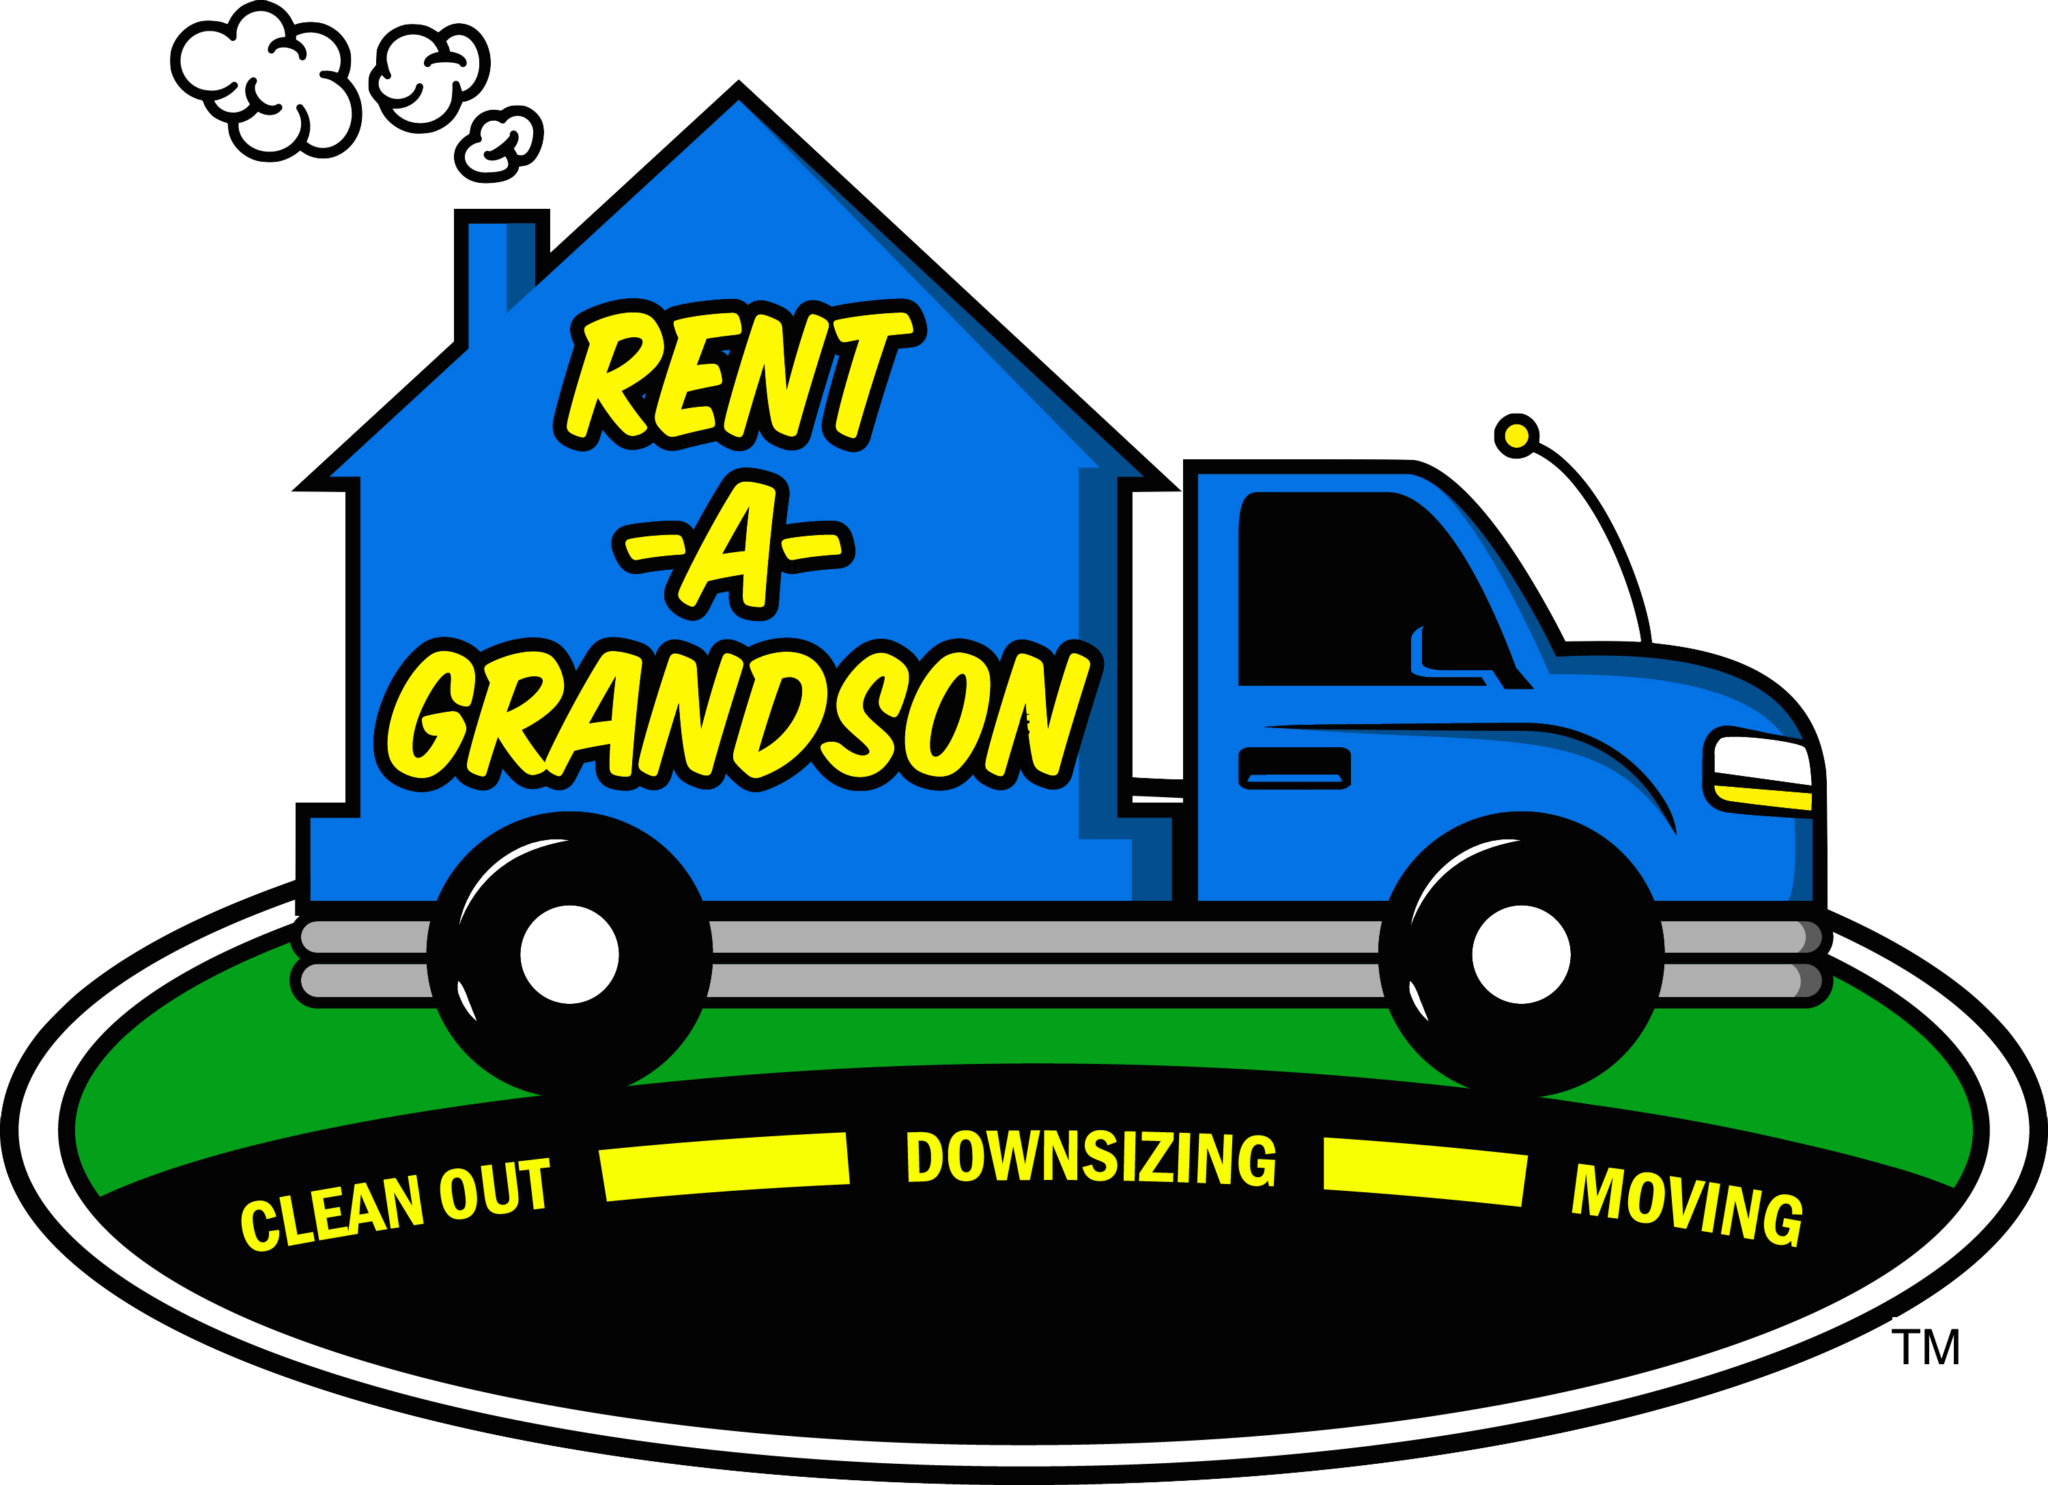 We Are A Team Of Young Senior Advocates Looking To - Rent-a-grandson Property Services (2048x1485)